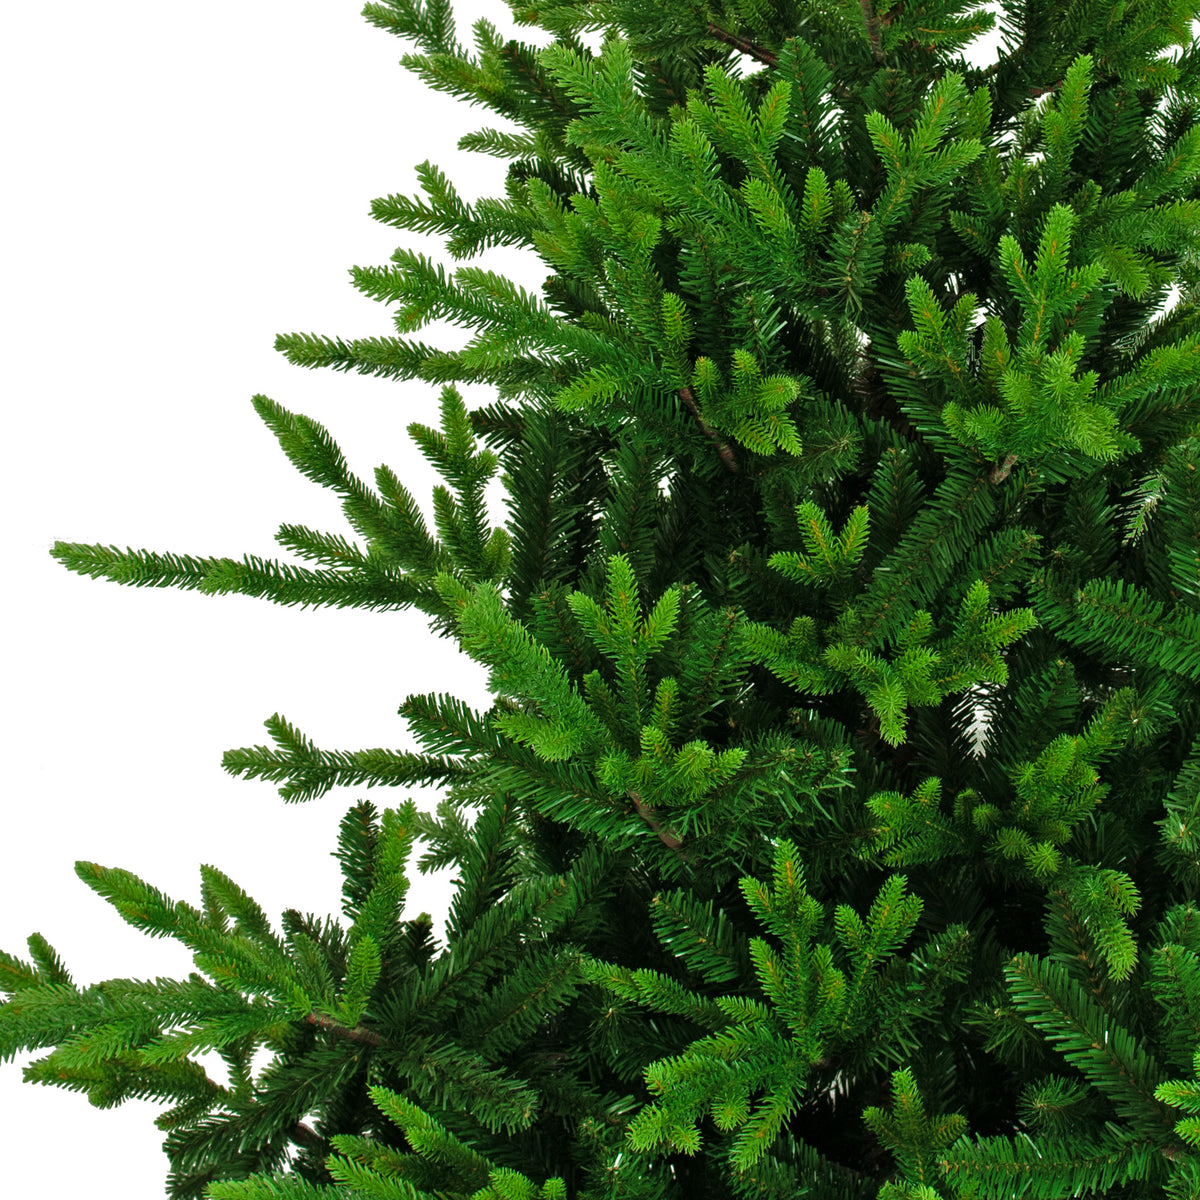 The middle branches of the 7FT Tall Noble Christmas Tree with artificial spruce and pine fur branches.